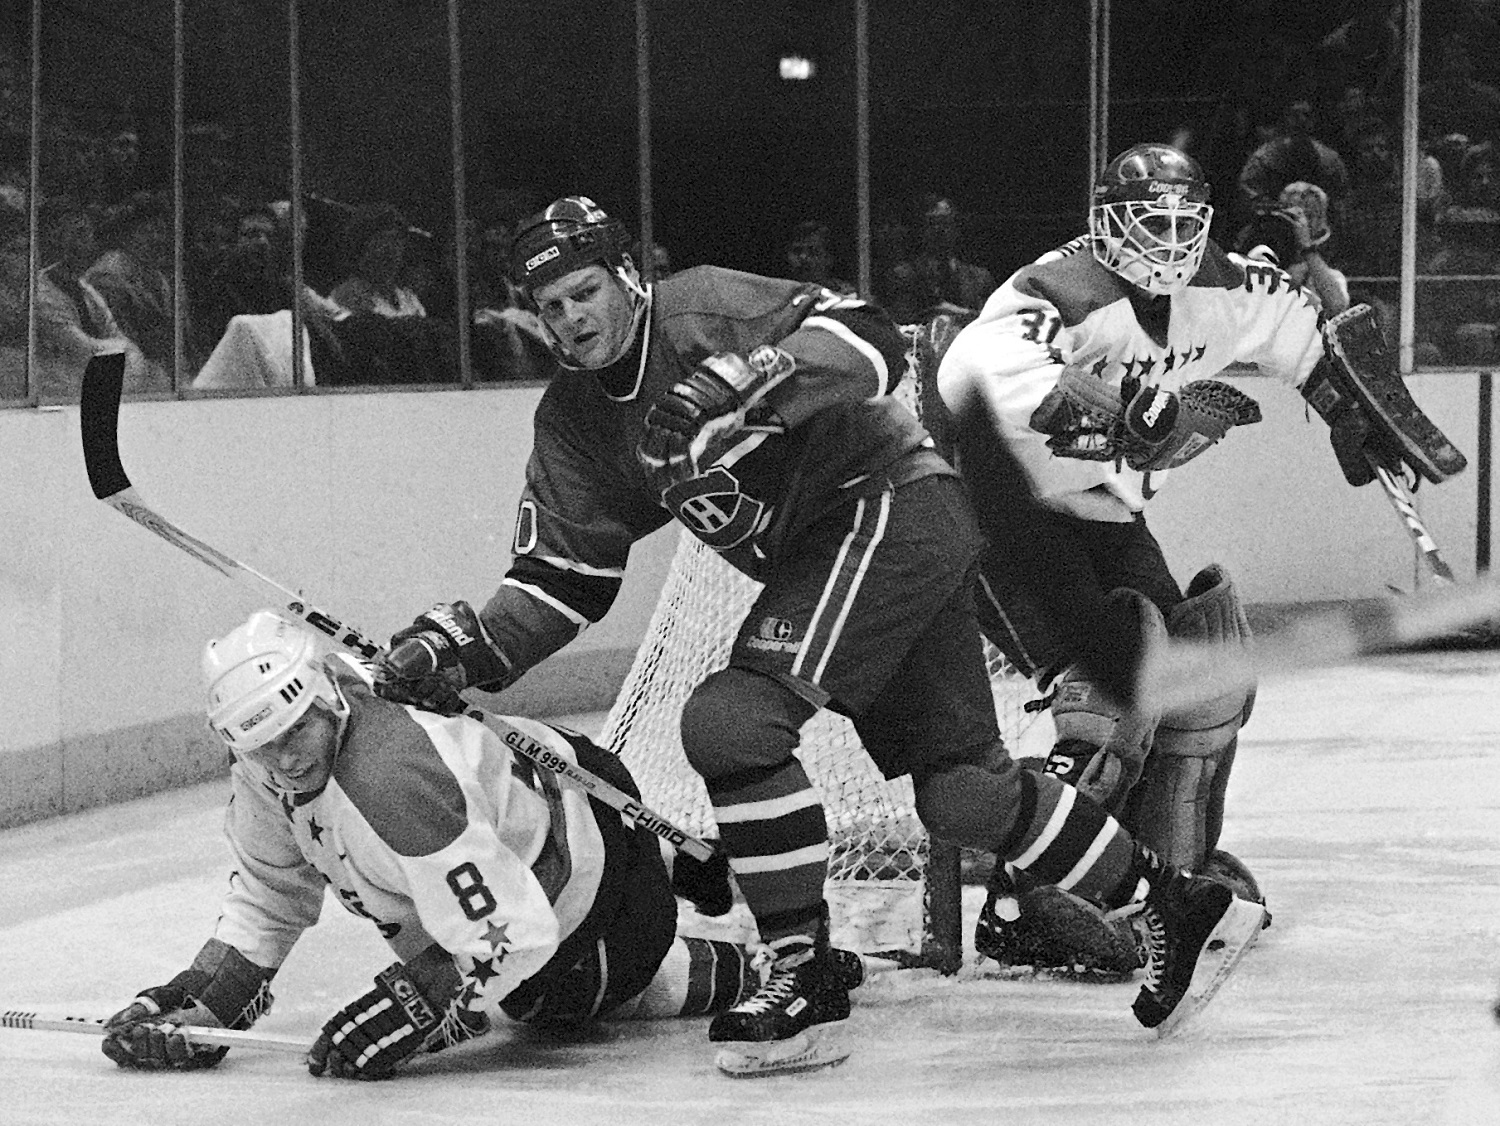 FILE - In this Dec. 6, 1986, file photo, Montreal Canadiens' Chris Nilan, center, shoves Washington Capitals' Larry Murphy to the ice during the first period of an NHL hockey game at the Capital Centre in Landover, Md. Nilan had a far greater fight than one on the ice. He battled herioin and alcohol addiction long after his career as one of the NHL's top brawlers. His life is documented in the upcoming documentary "The Last Gladiators." (AP Photo/Joe Giza, File)